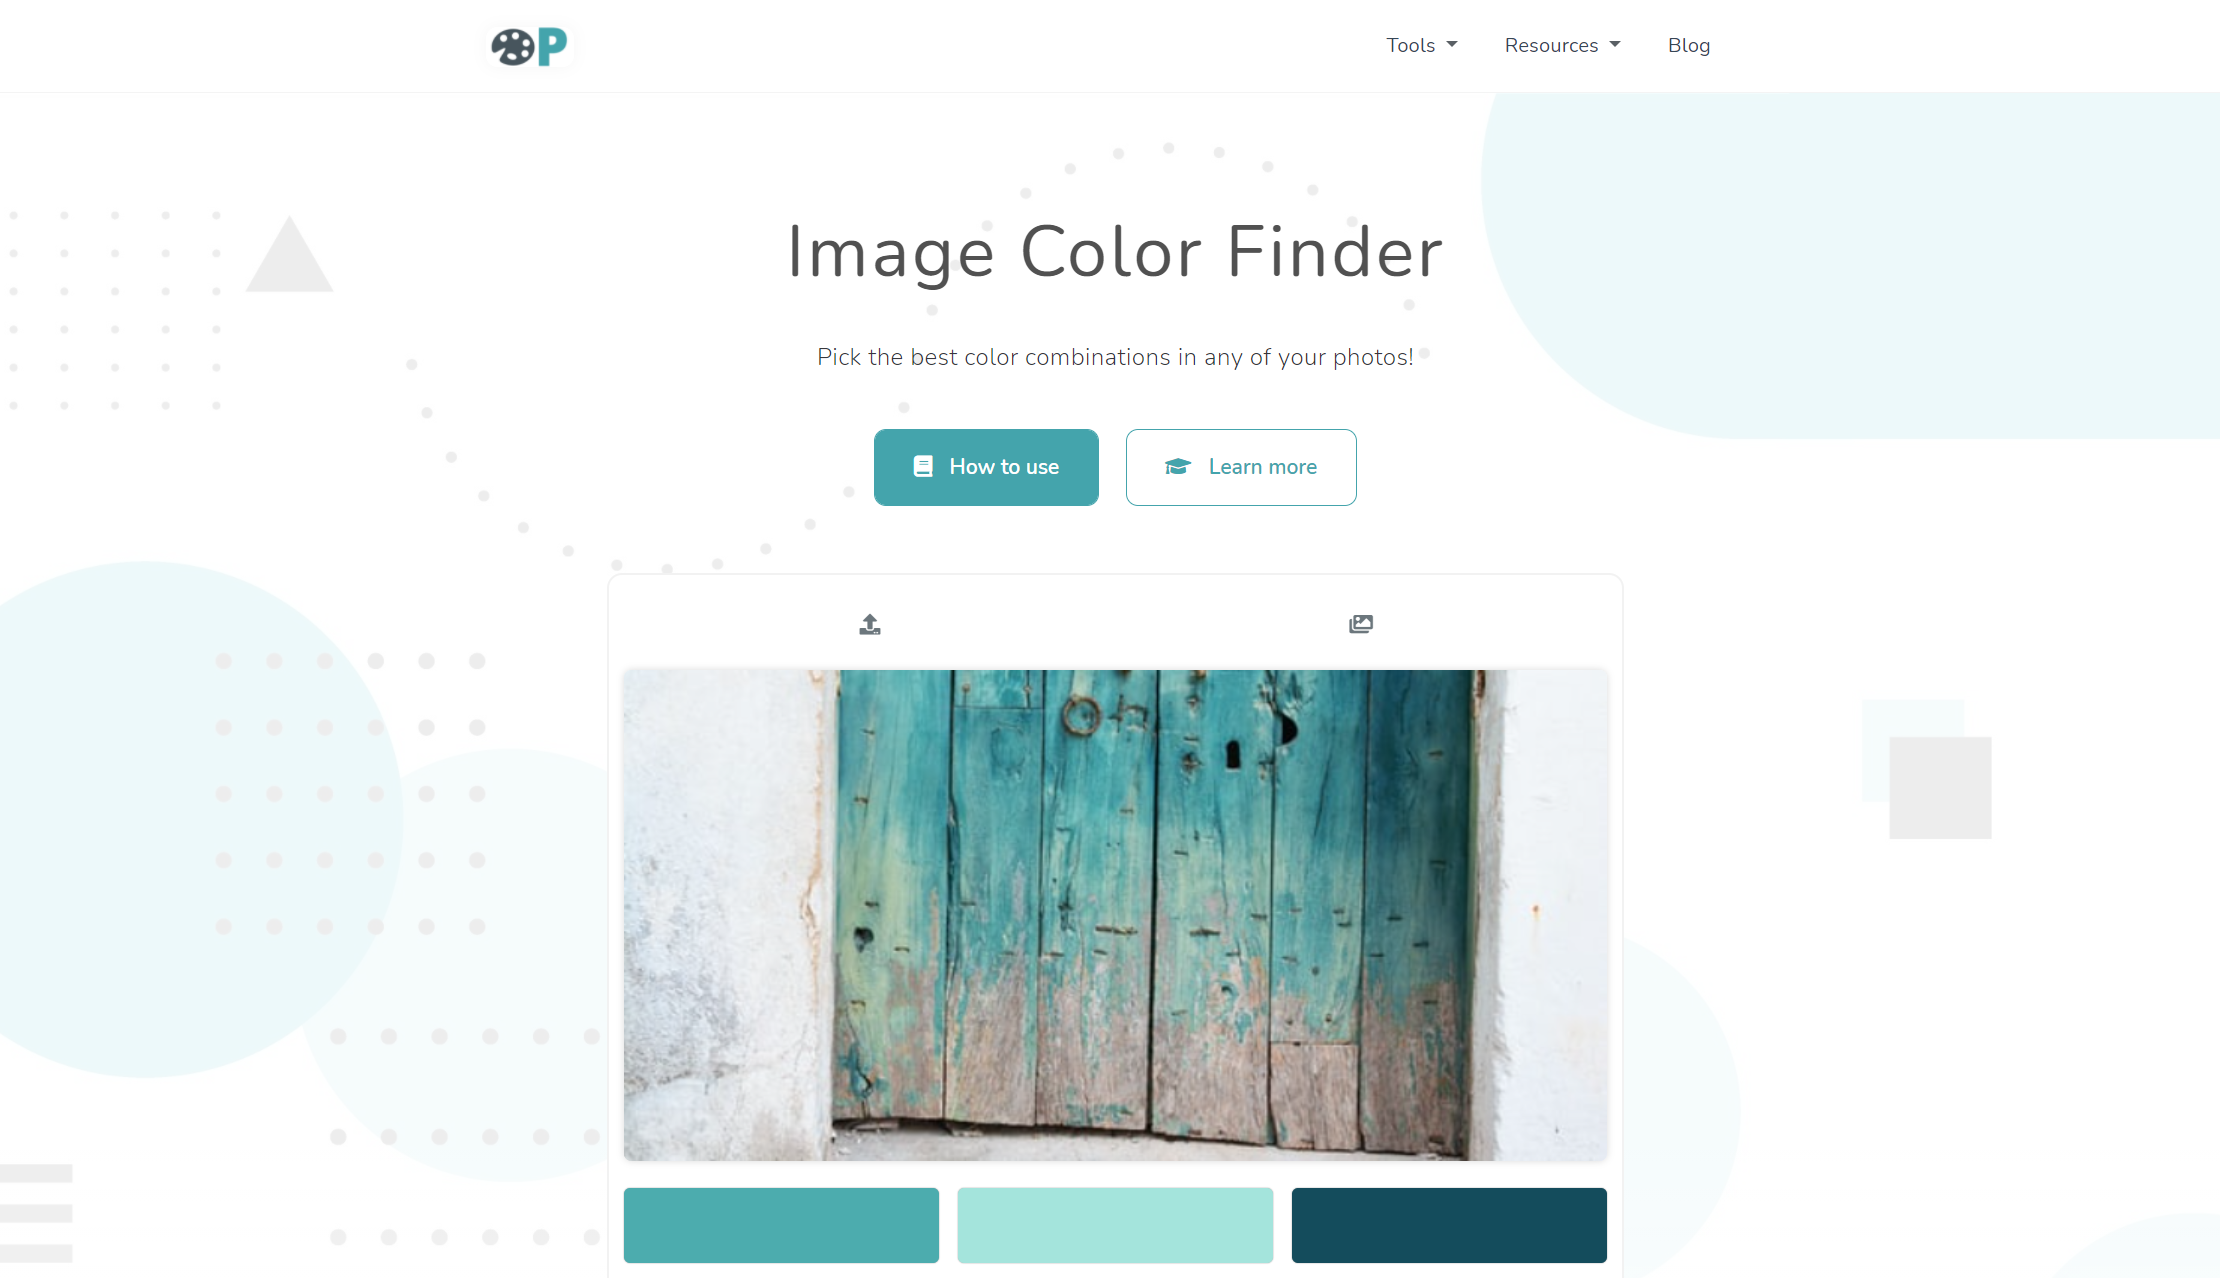 Home page of ImageColorFinder.com